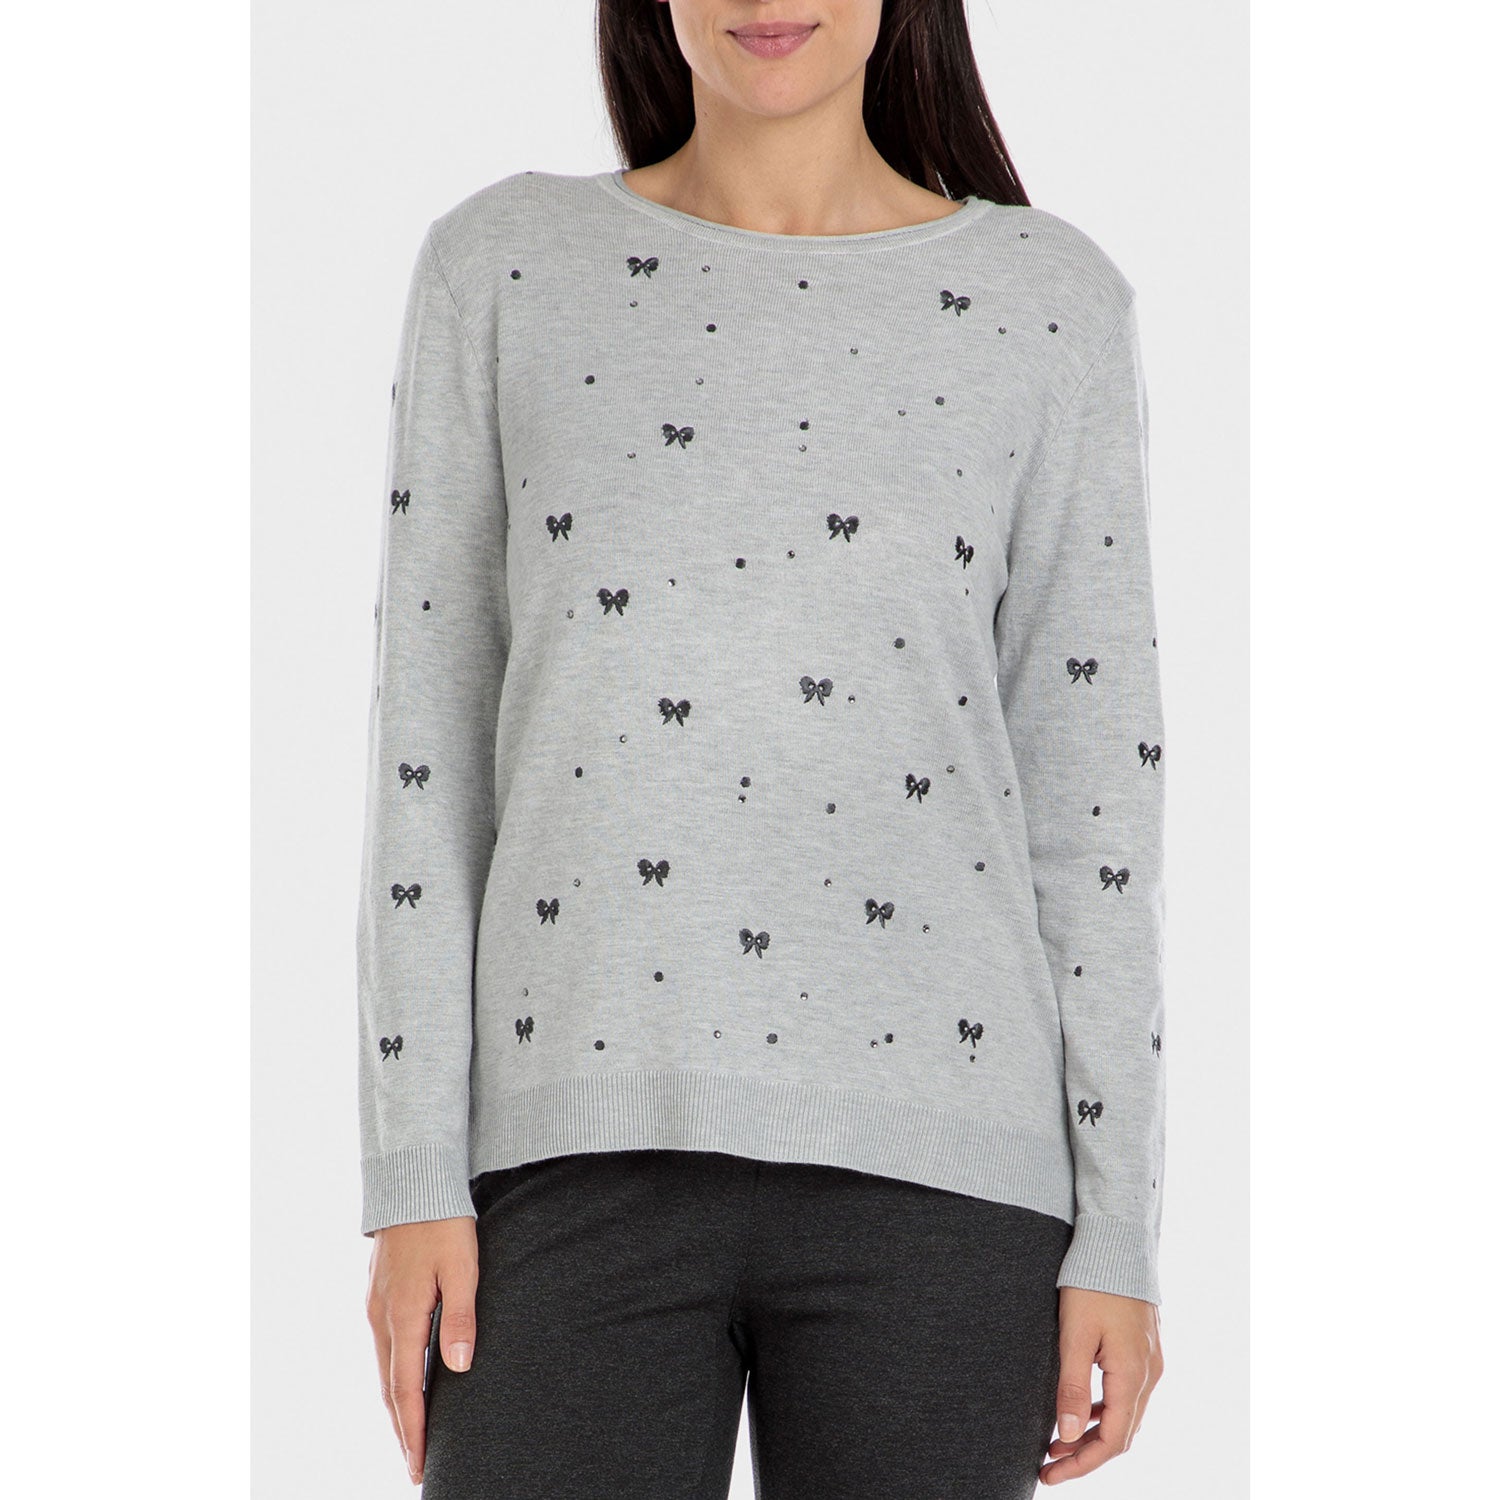 Punt Roma Rhinestone Embroidered Sweater - Grey 1 Shaws Department Stores